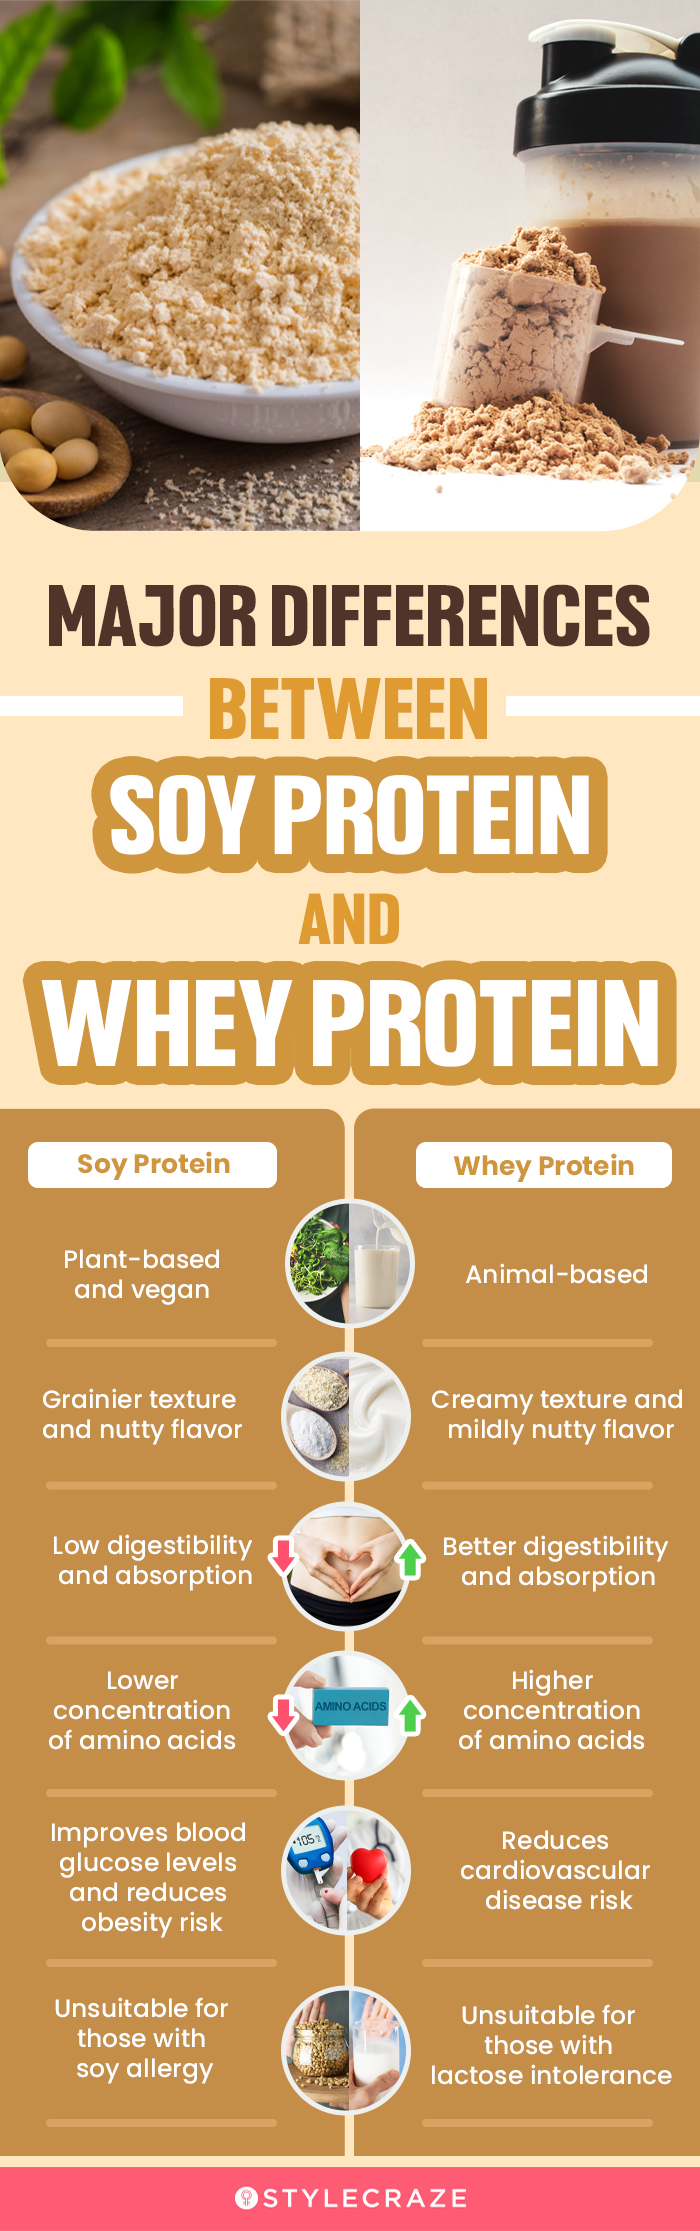 major differences between soy protein and whey protein (infographic)